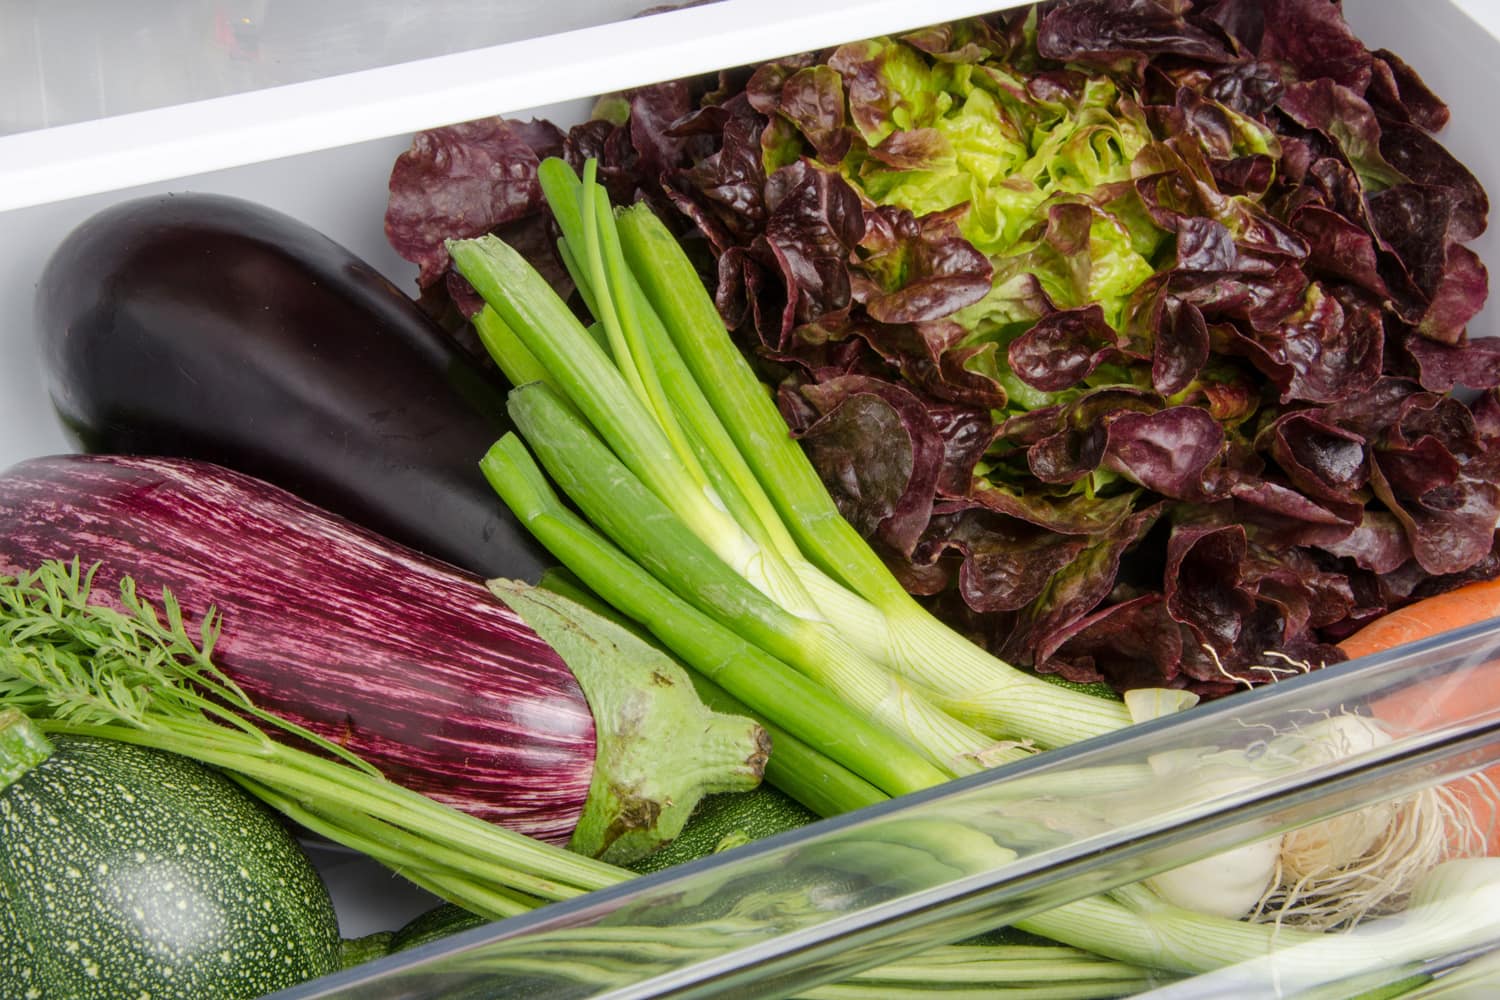 Fresh vegetables in the bottom of the refrigerator